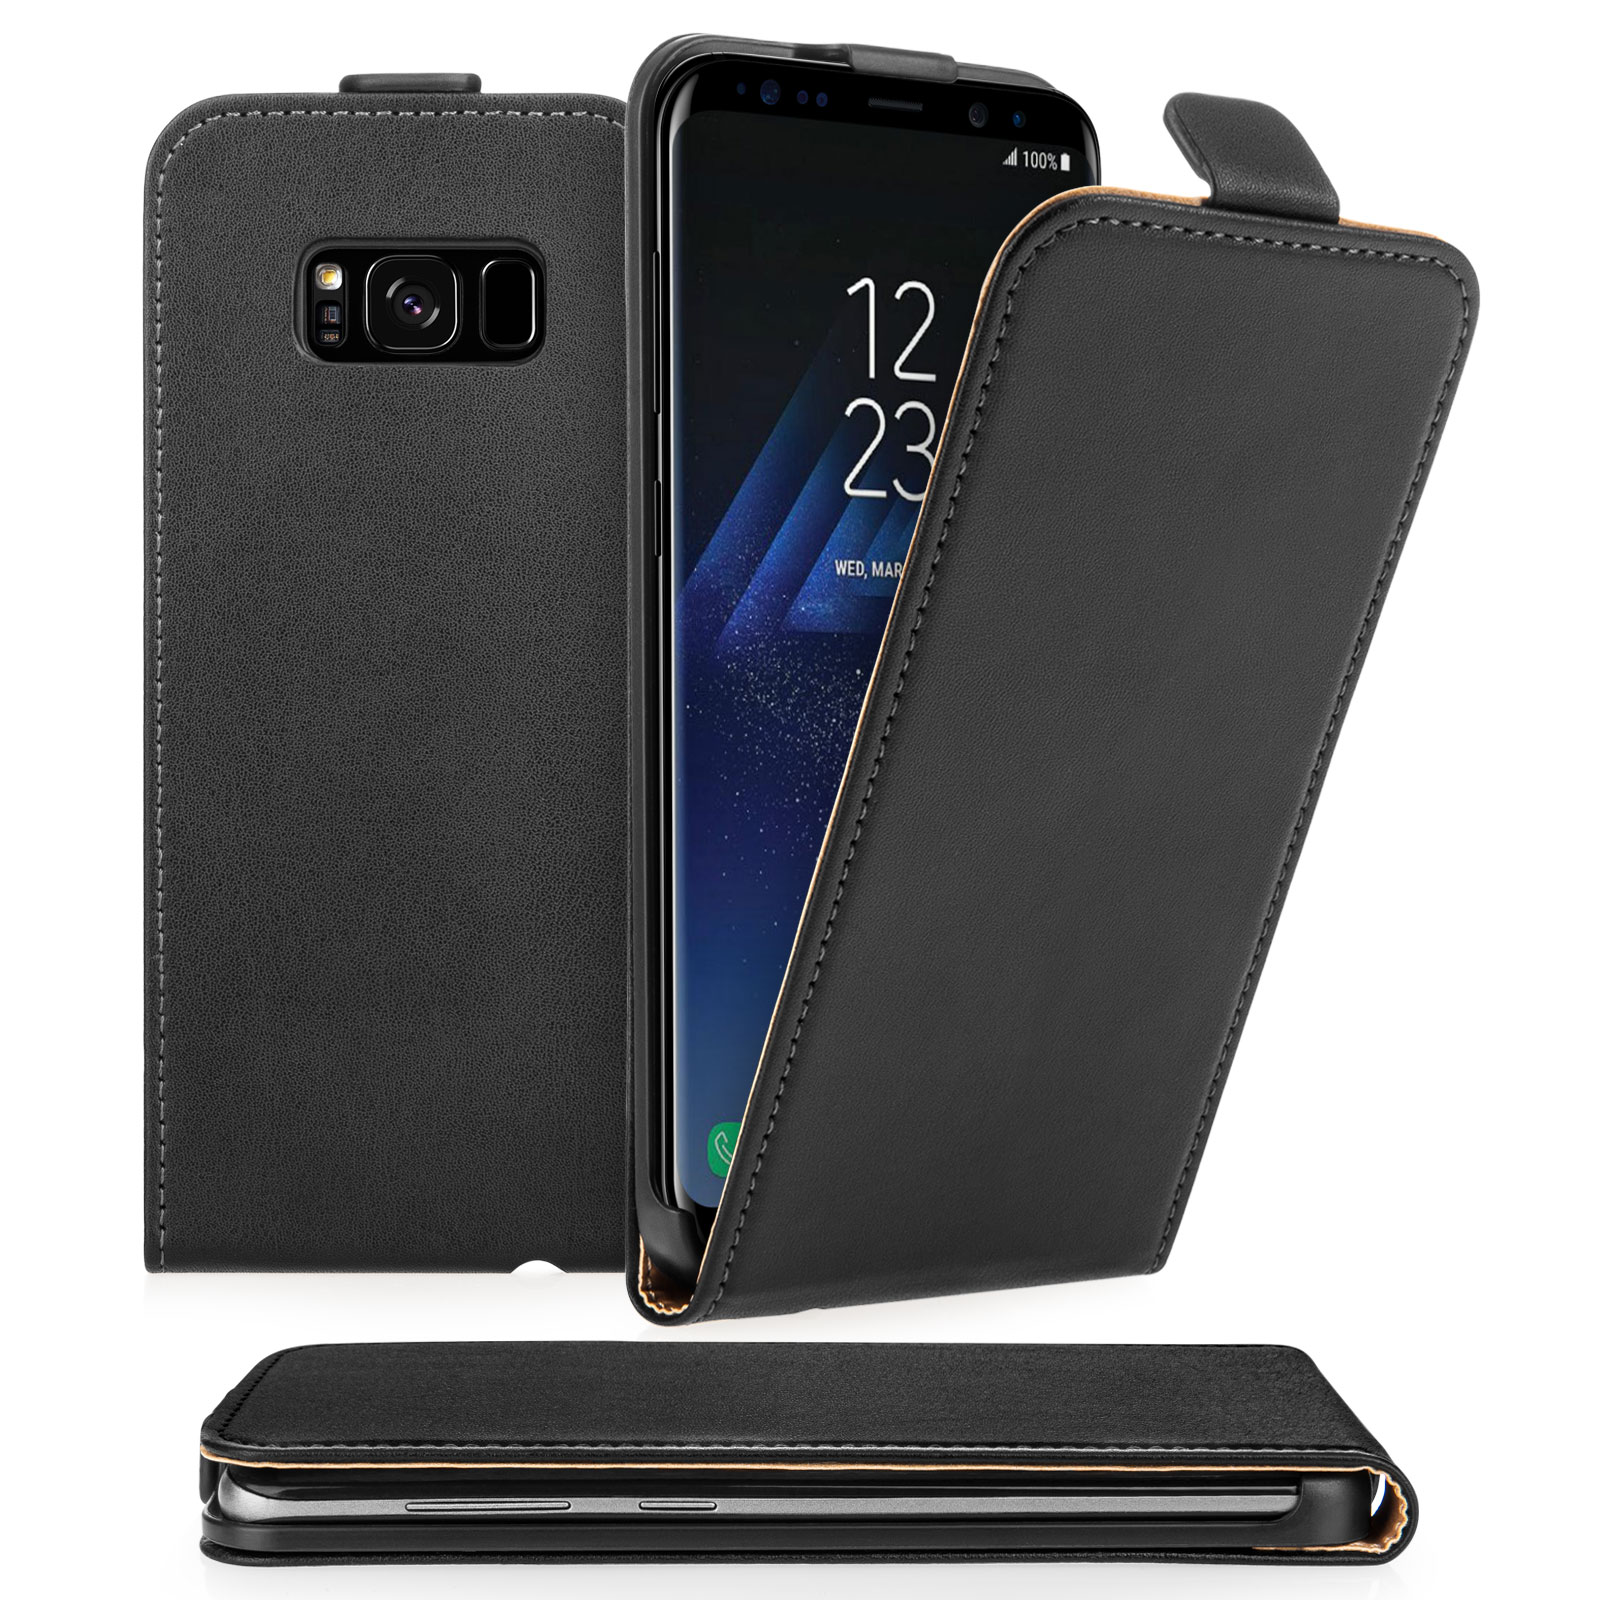 Caseflex Samsung Galaxy S8 Real Leather Flip Case Black At Mobile Madhouse Mobile Phone